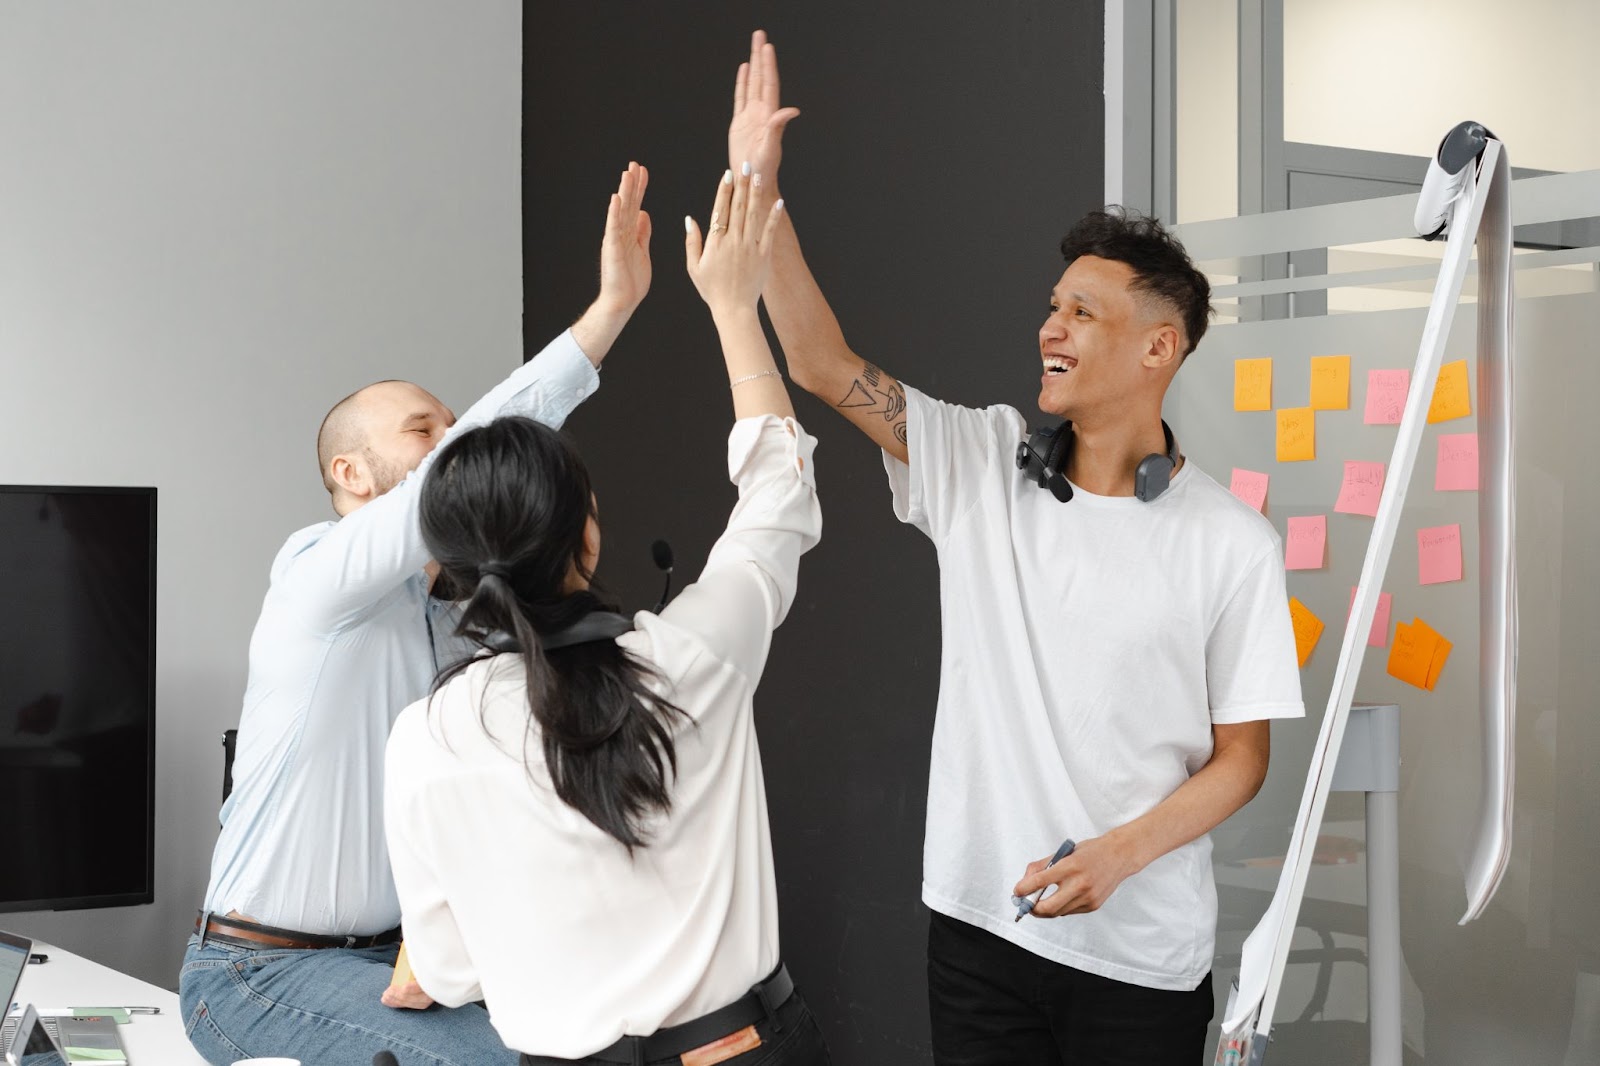 Image of a group of office workers happily high-fiving